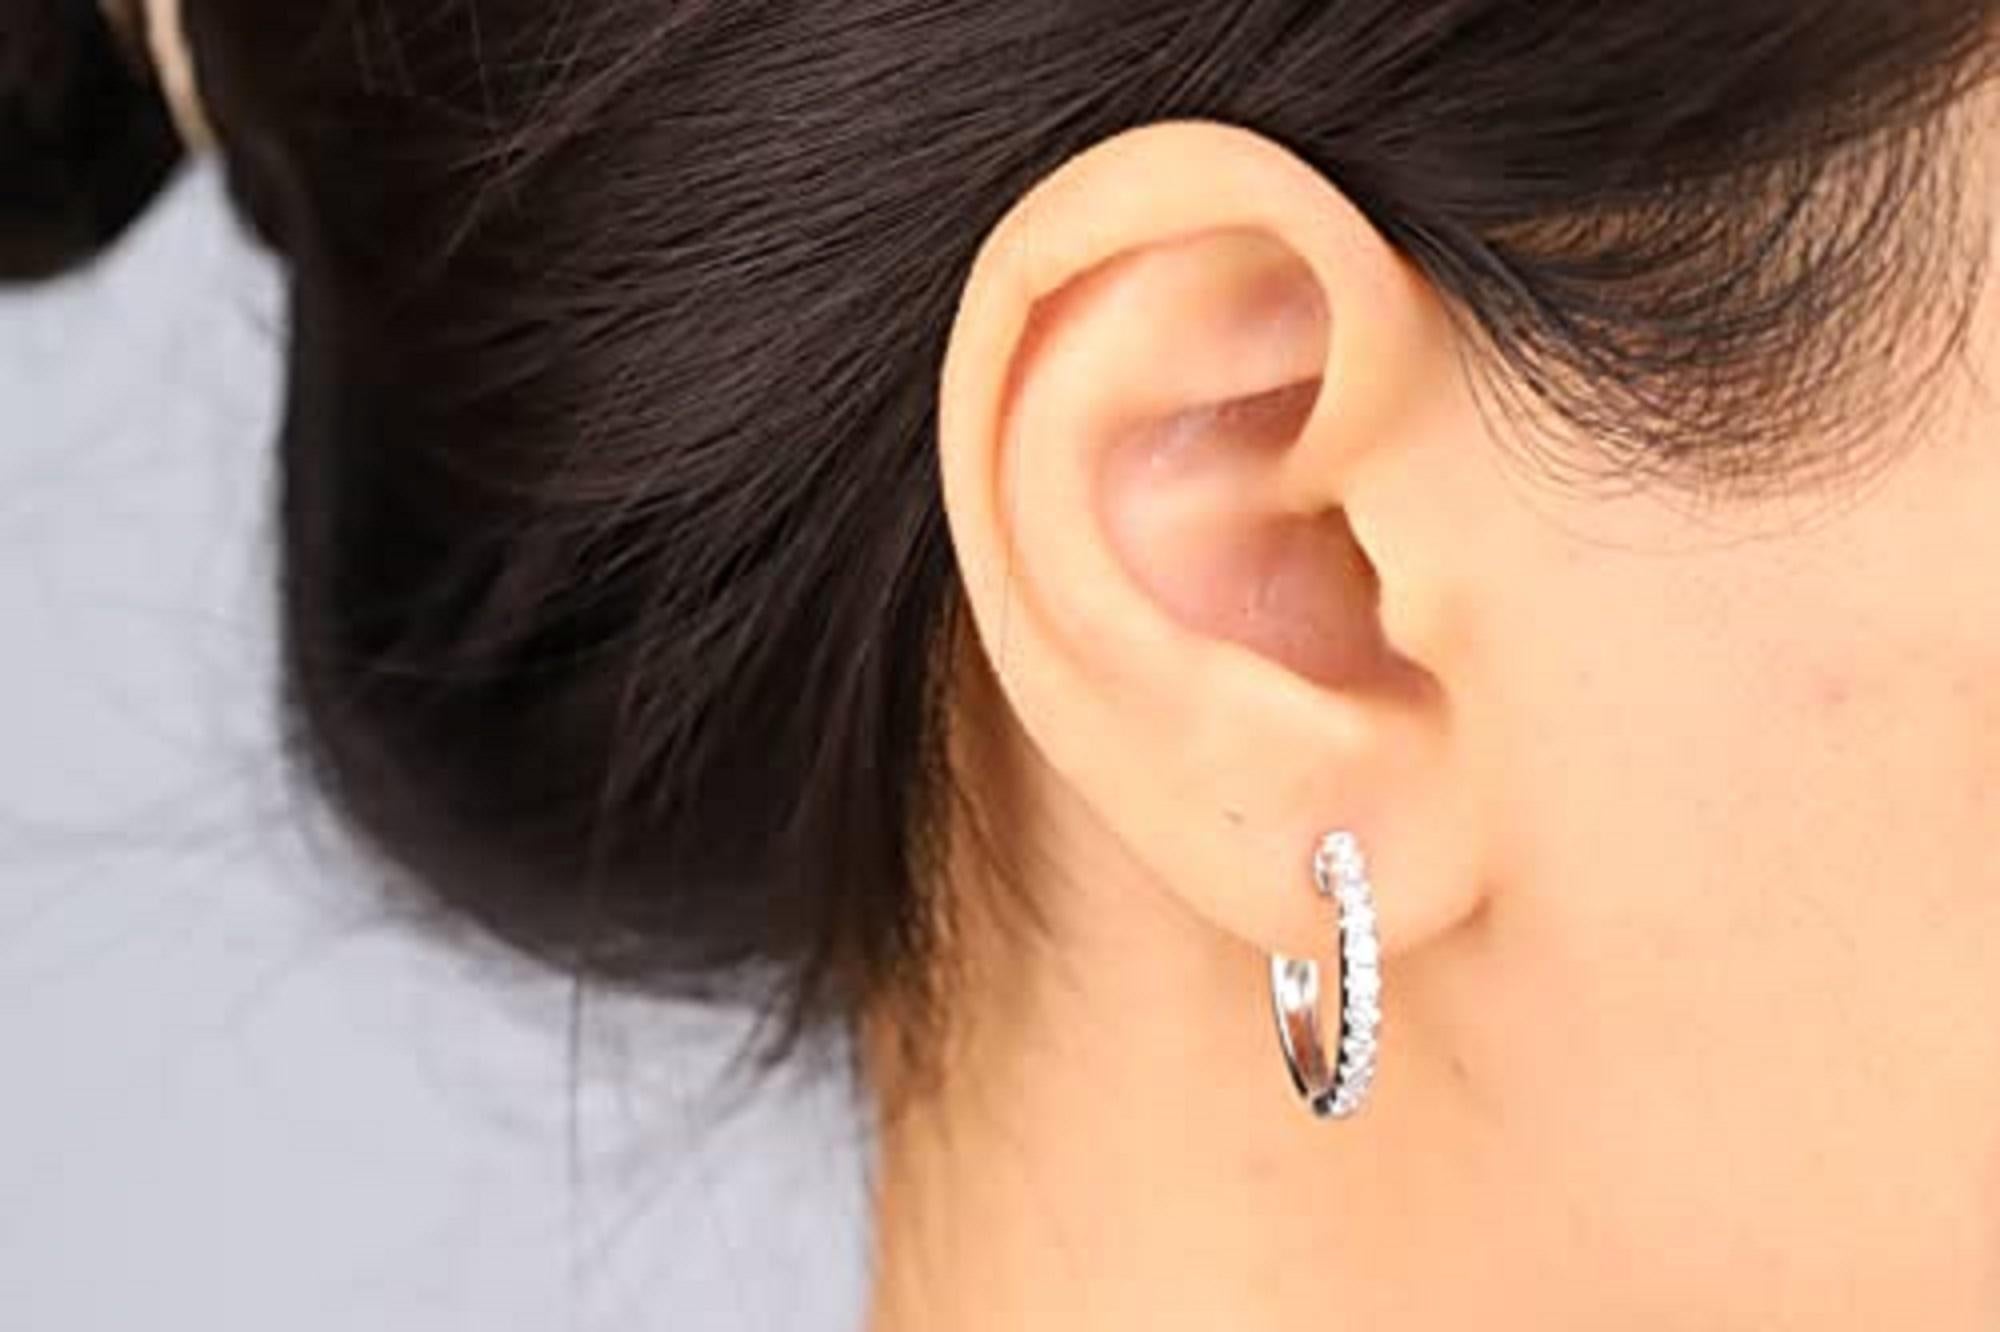 Decorate yourself in elegance with this Earring is crafted from 14-karat white Gold by Gin & Grace. This Earring is made up of Round-cut White Diamond (24 Pcs) 0.52 Carat. This Earring is weight 4.23 grams. This delicate Earring is polished to a